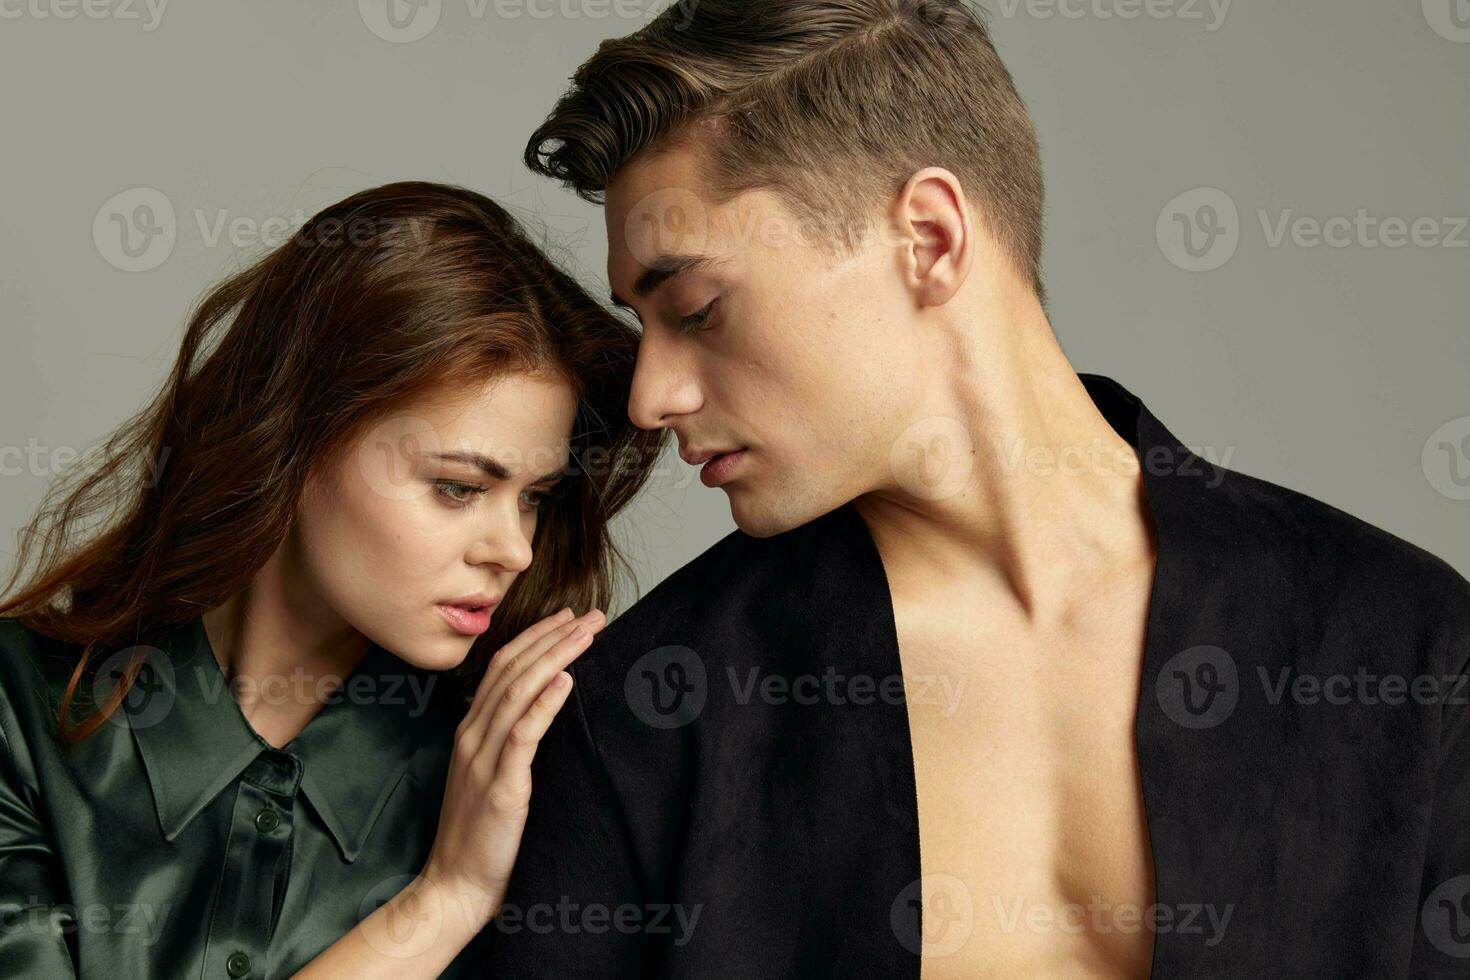 Cute young couple luxury charm seduction close-up photo